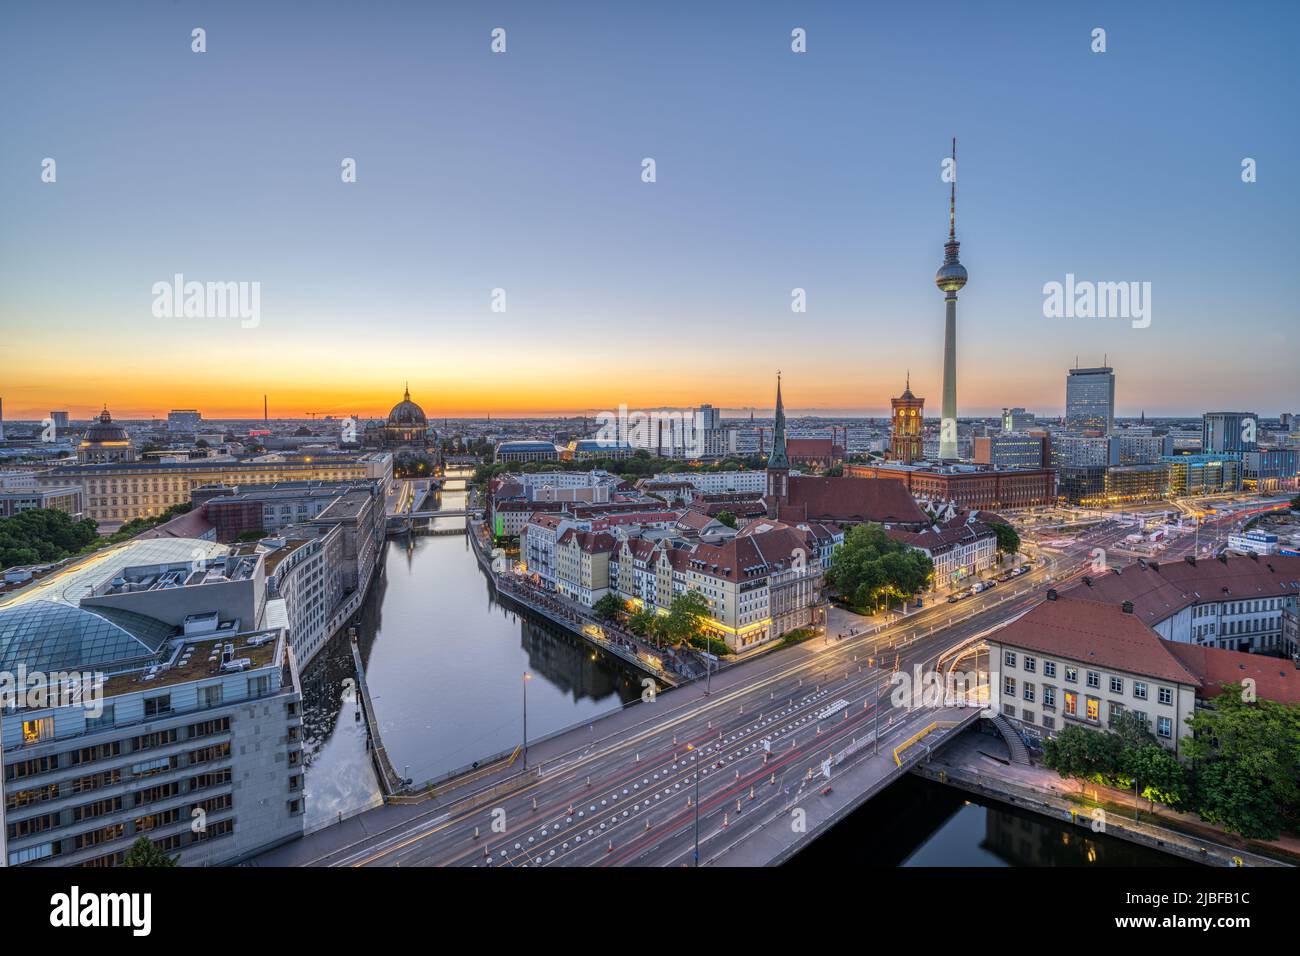 Downtown Berlin after sunset with the TV Tower, the town hall, the Cathedral and the reconstructed City Palace Stock Photo